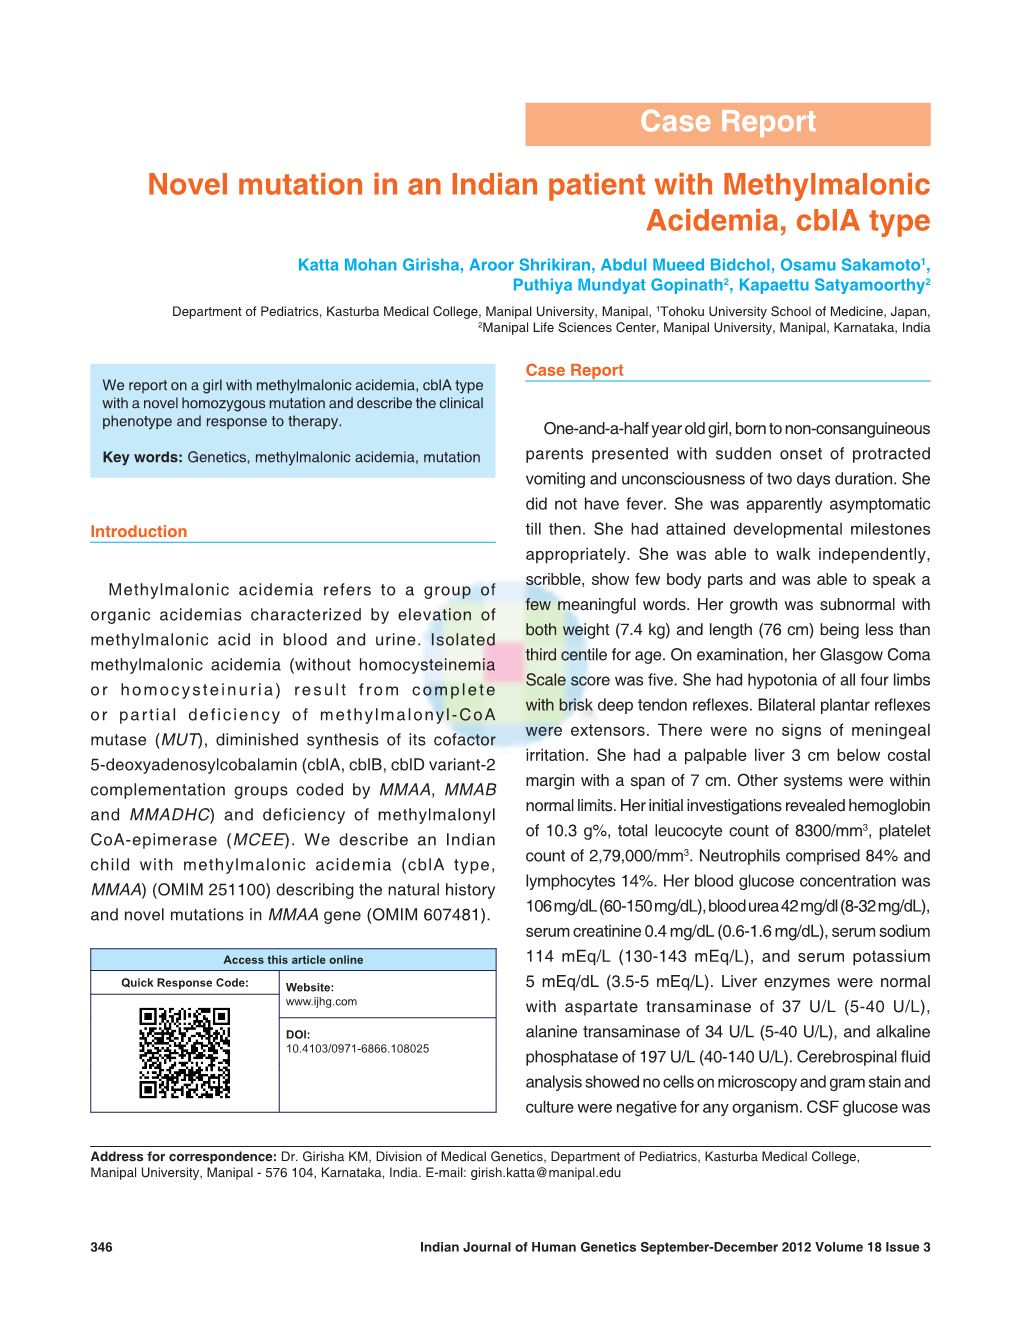 Novel Mutation in an Indian Patient with Methylmalonic Acidemia, Cbla Type